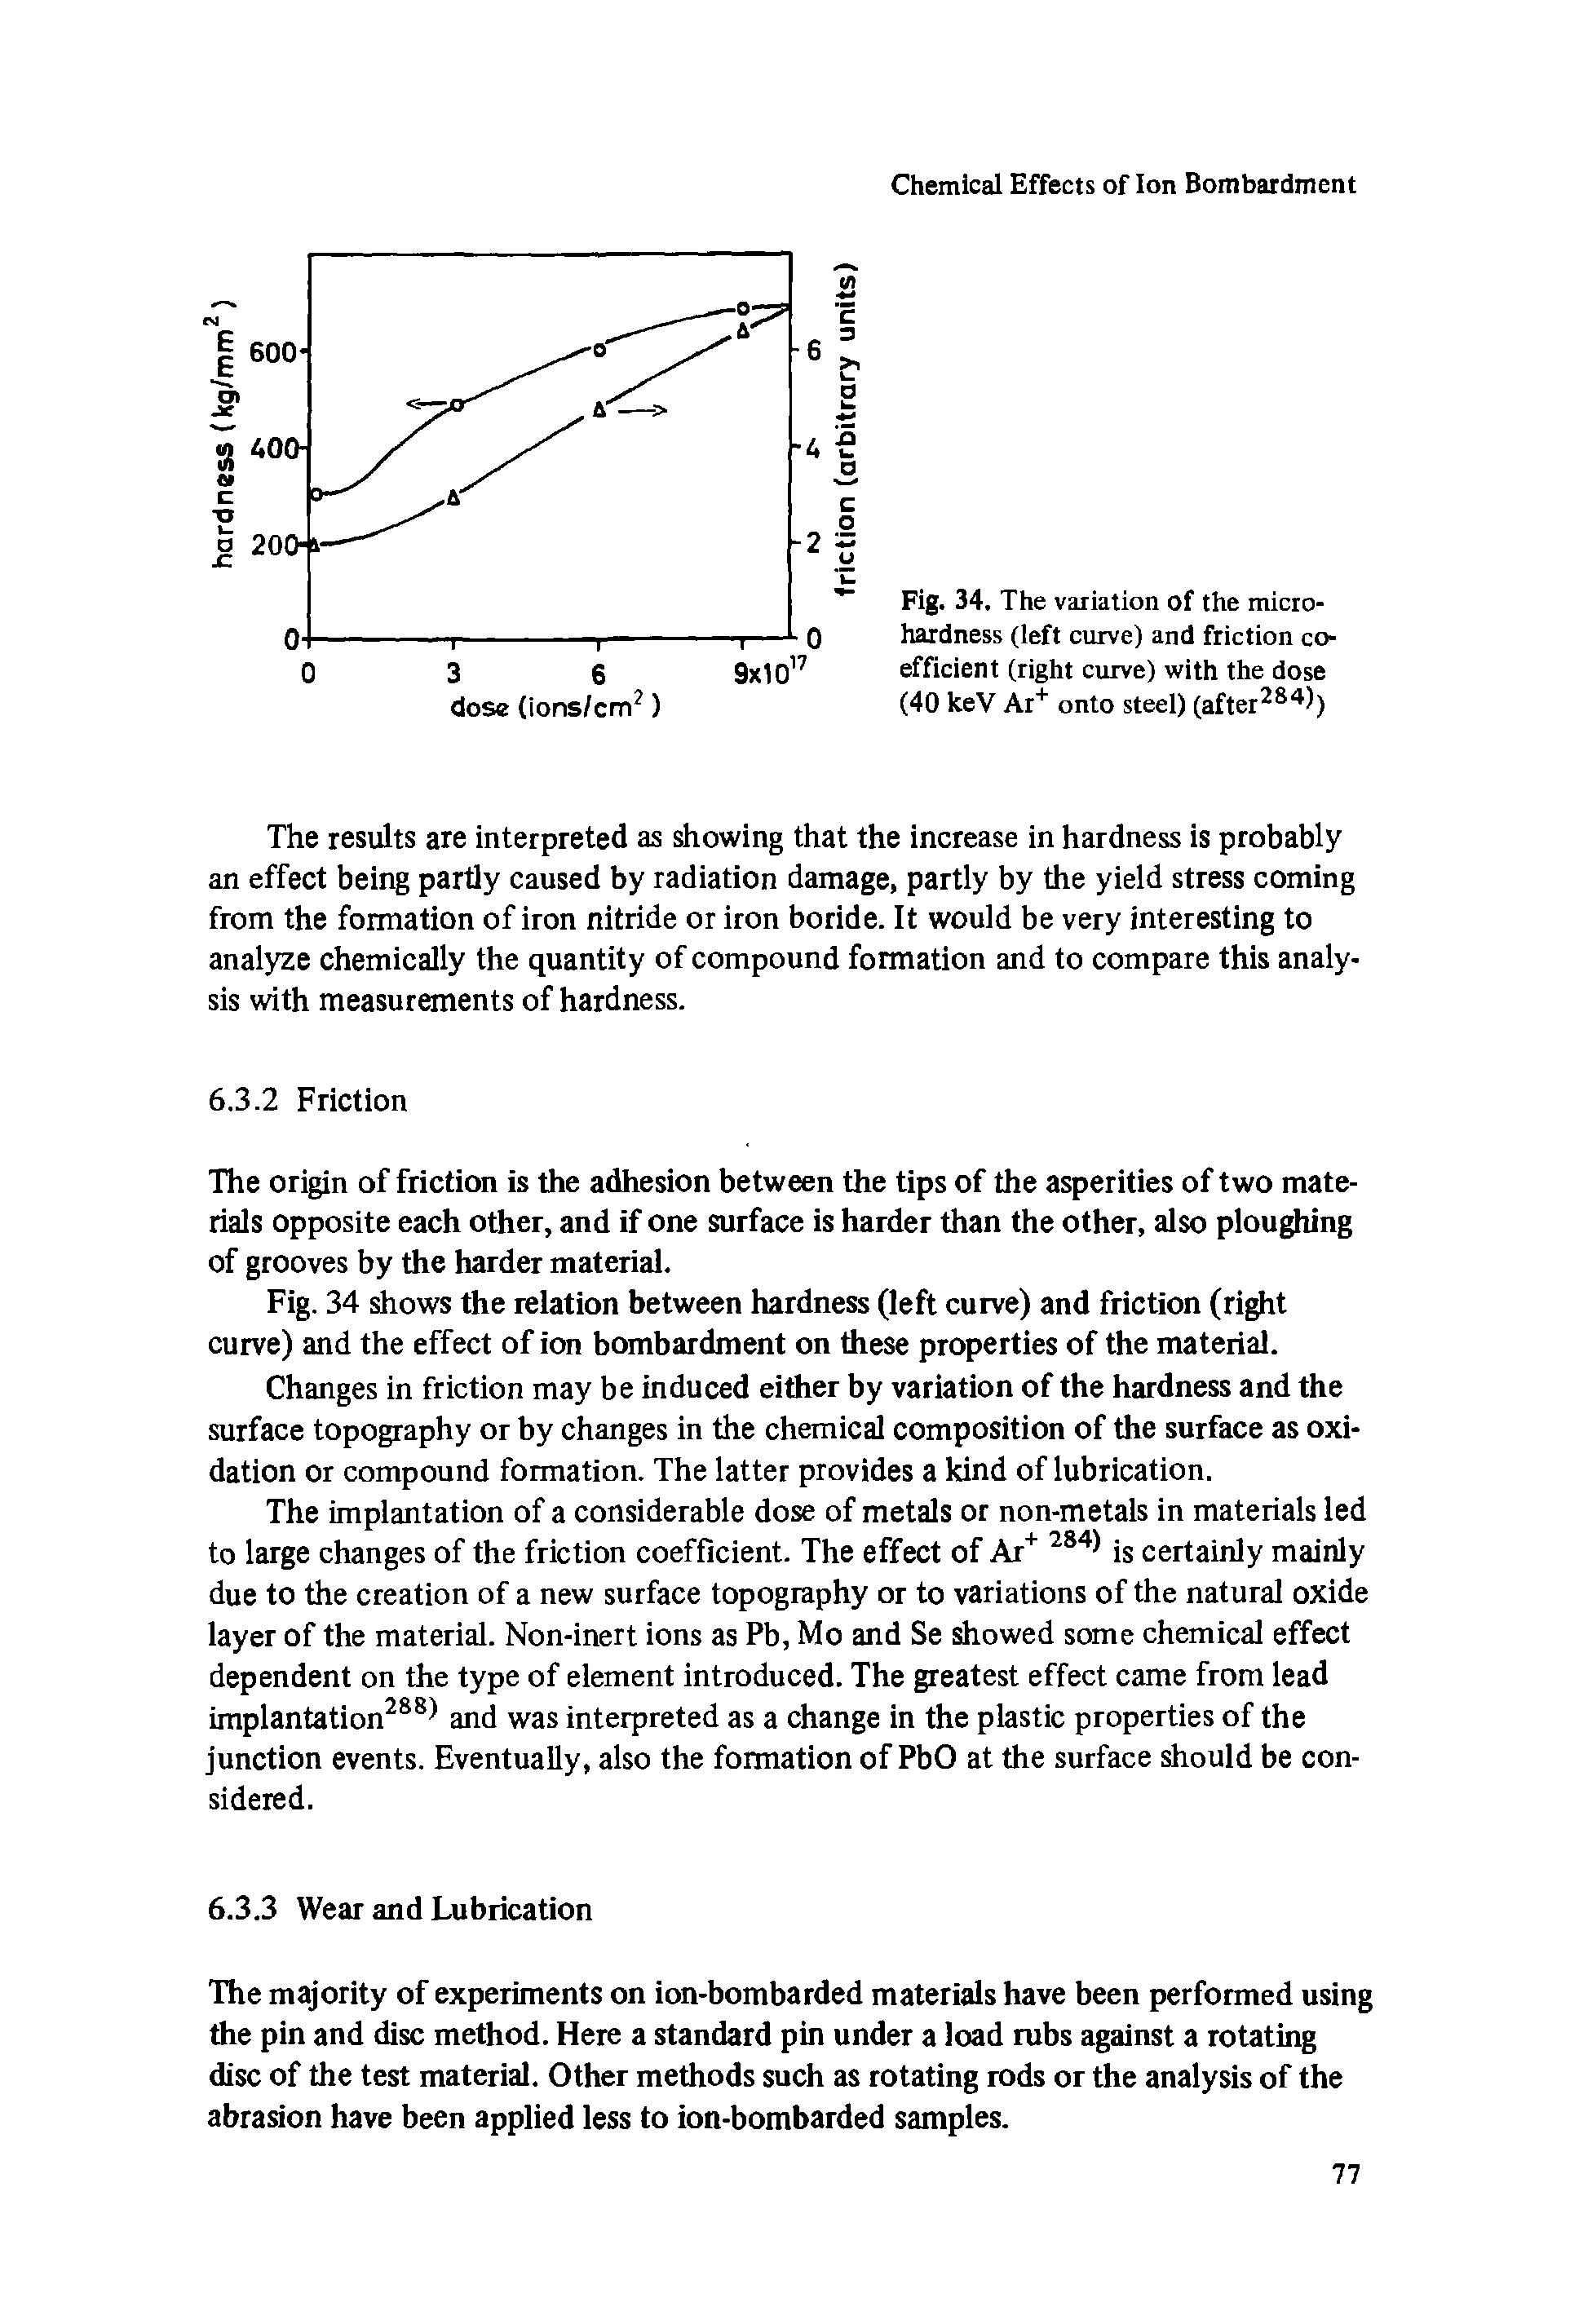 Fig. 34. The variation of the micro-hardness (left curve) and friction coefficient (right curve) with the dose (40 keV Ar onto steel) (after ))...